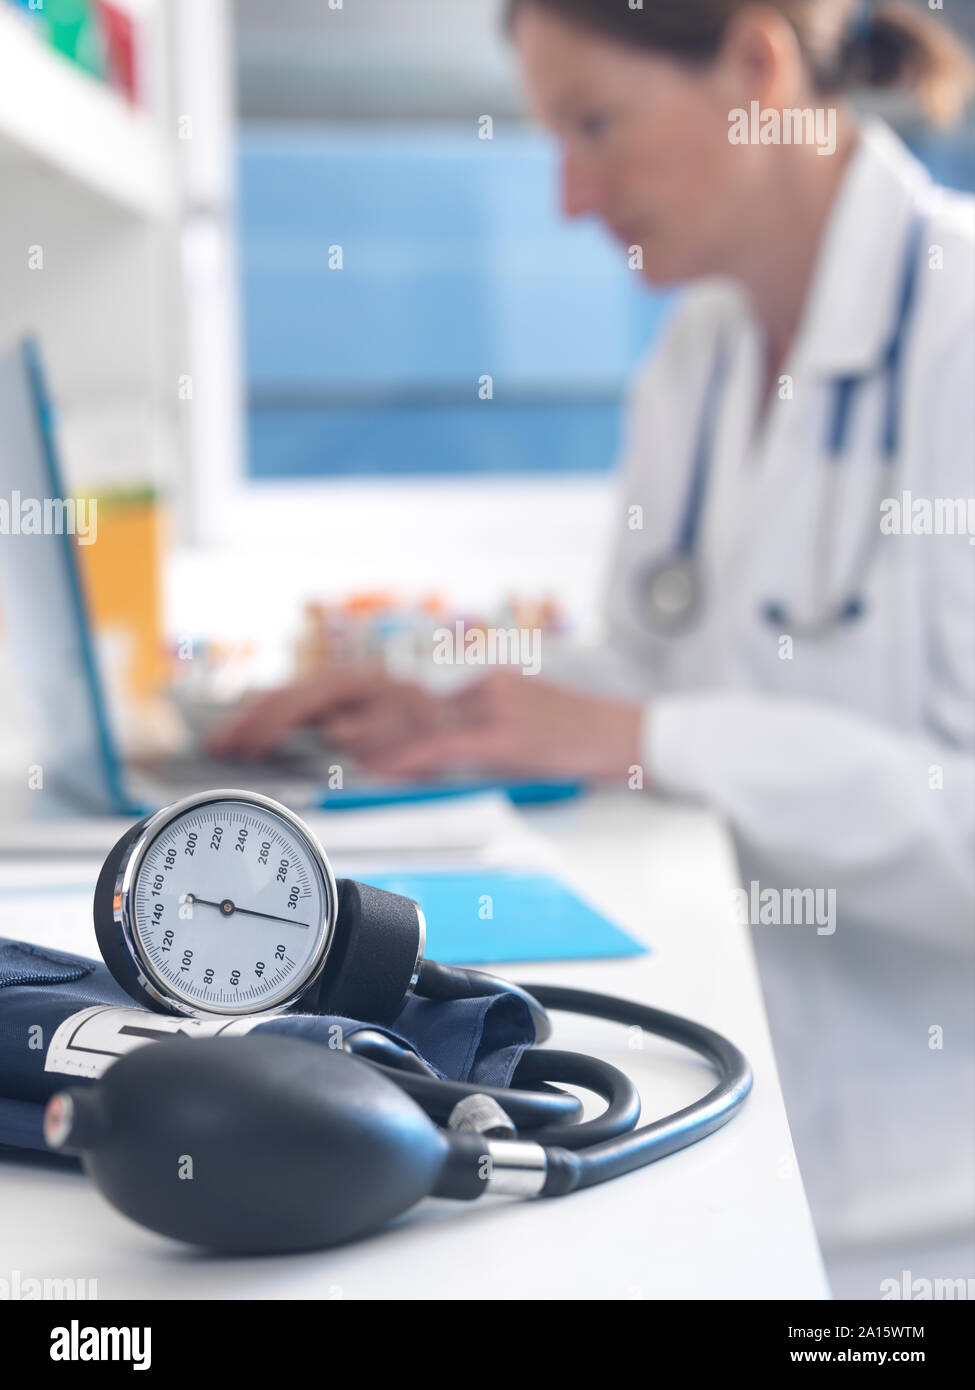 Health check, Doctor examining patients records after a consultation with the focus on a blood pressure gauge Stock Photo